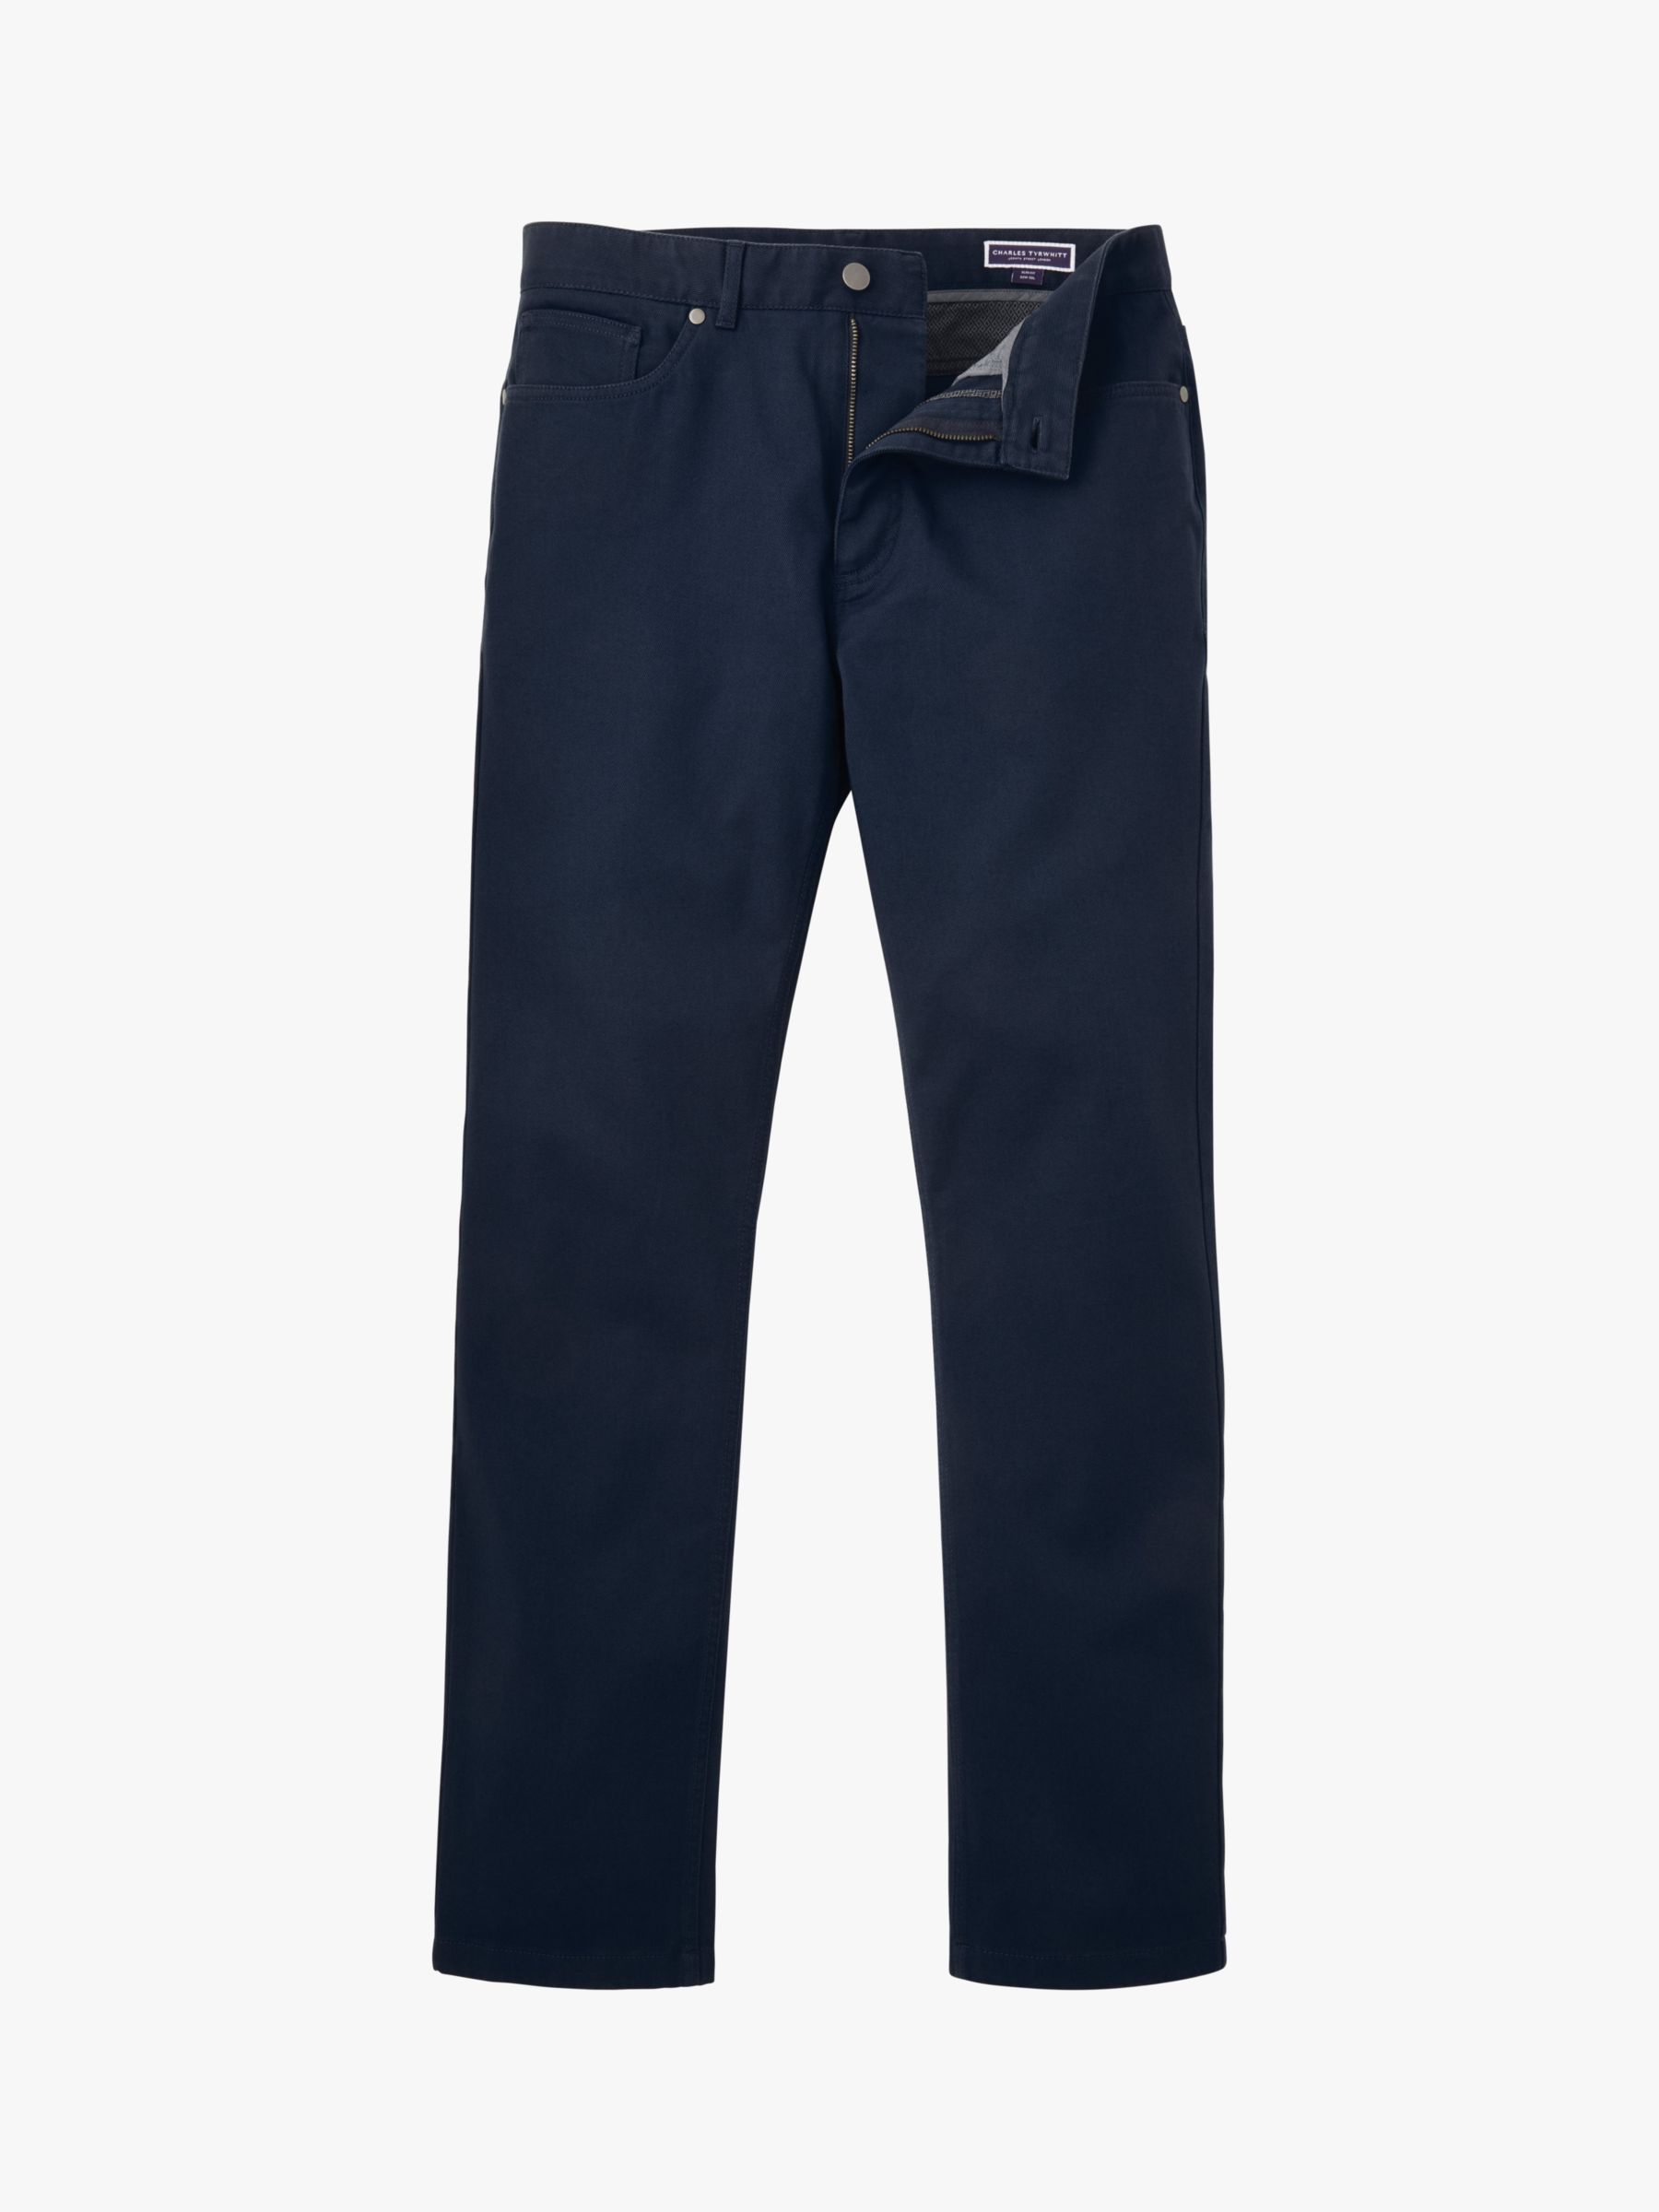 Buy Charles Tyrwhitt Classic Fit 5 Pocket Twill Jeans Online at johnlewis.com